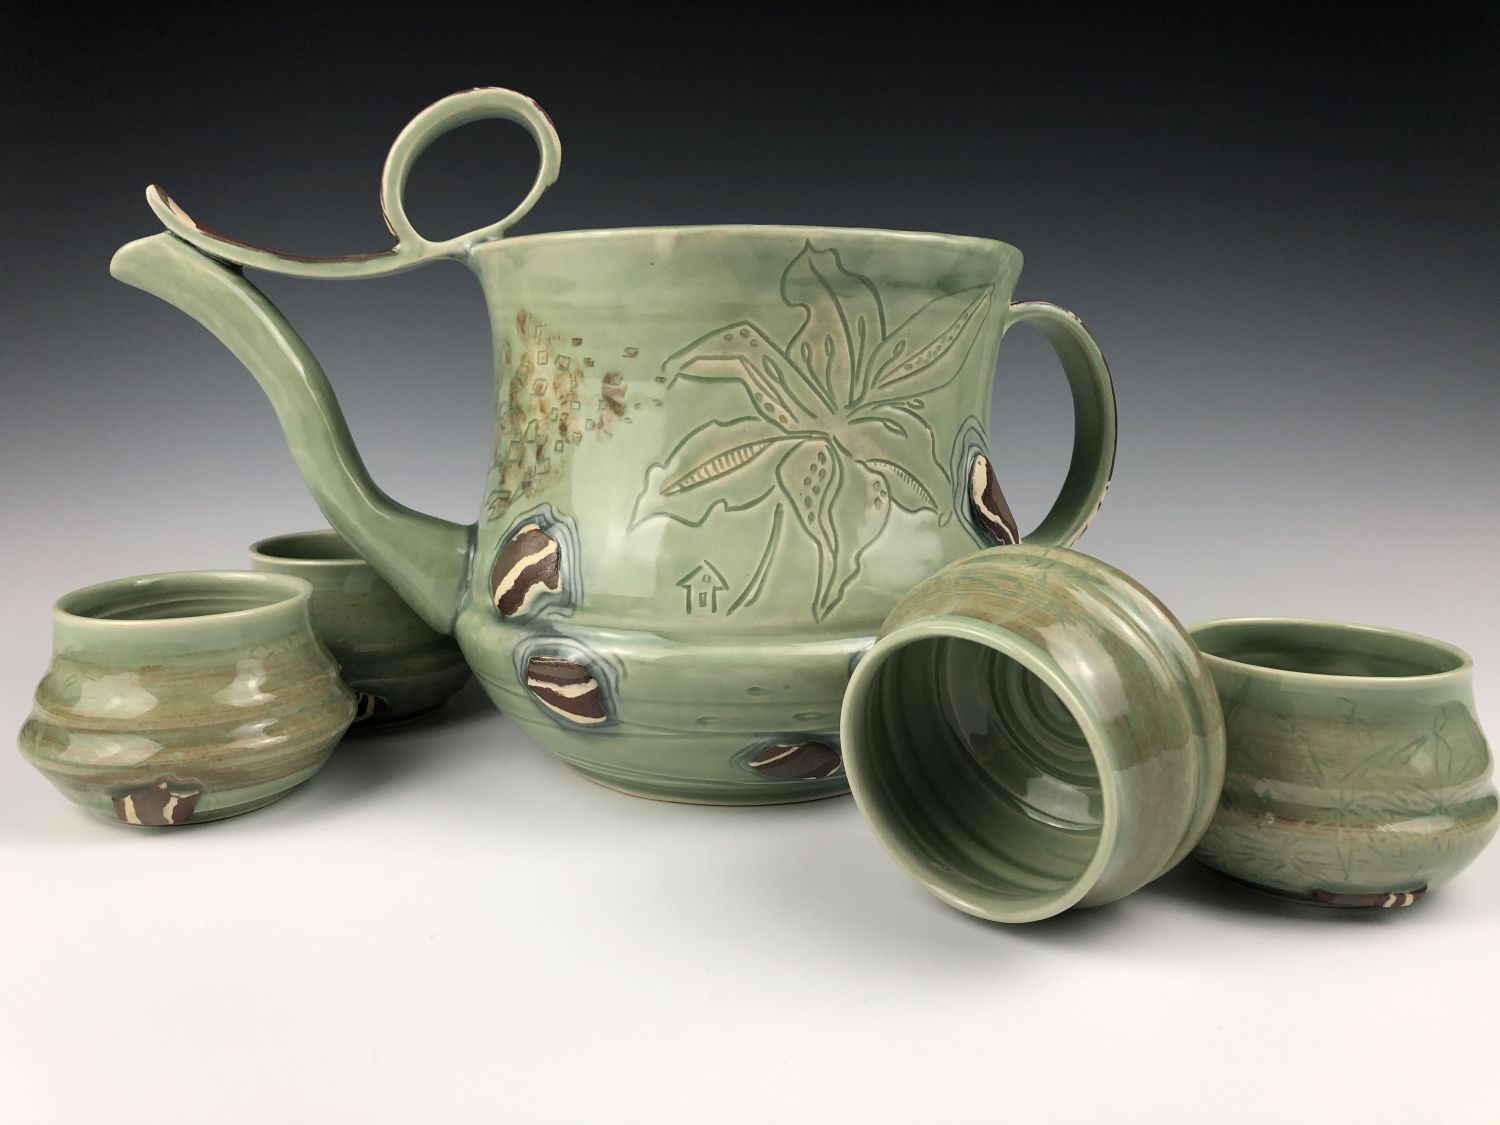 Kristina Rose Studios: Jug and Four Cups (Sold as a set of five) Product Image 6 of 6